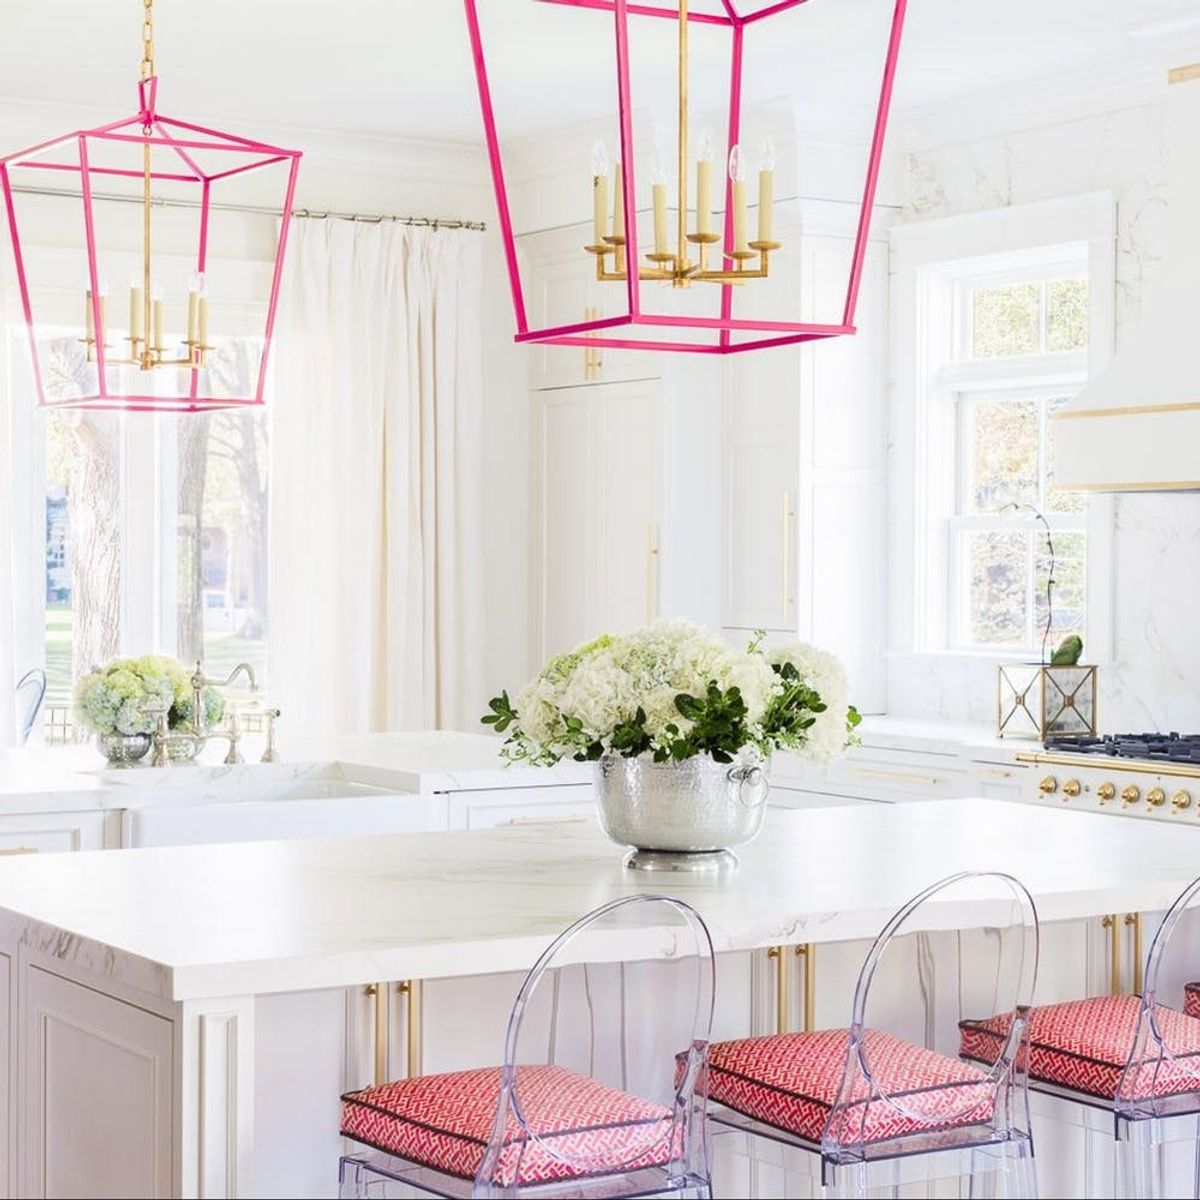 10 Kate Spade New York-Inspired Kitchens You’ll Want to Do More Than Cook In